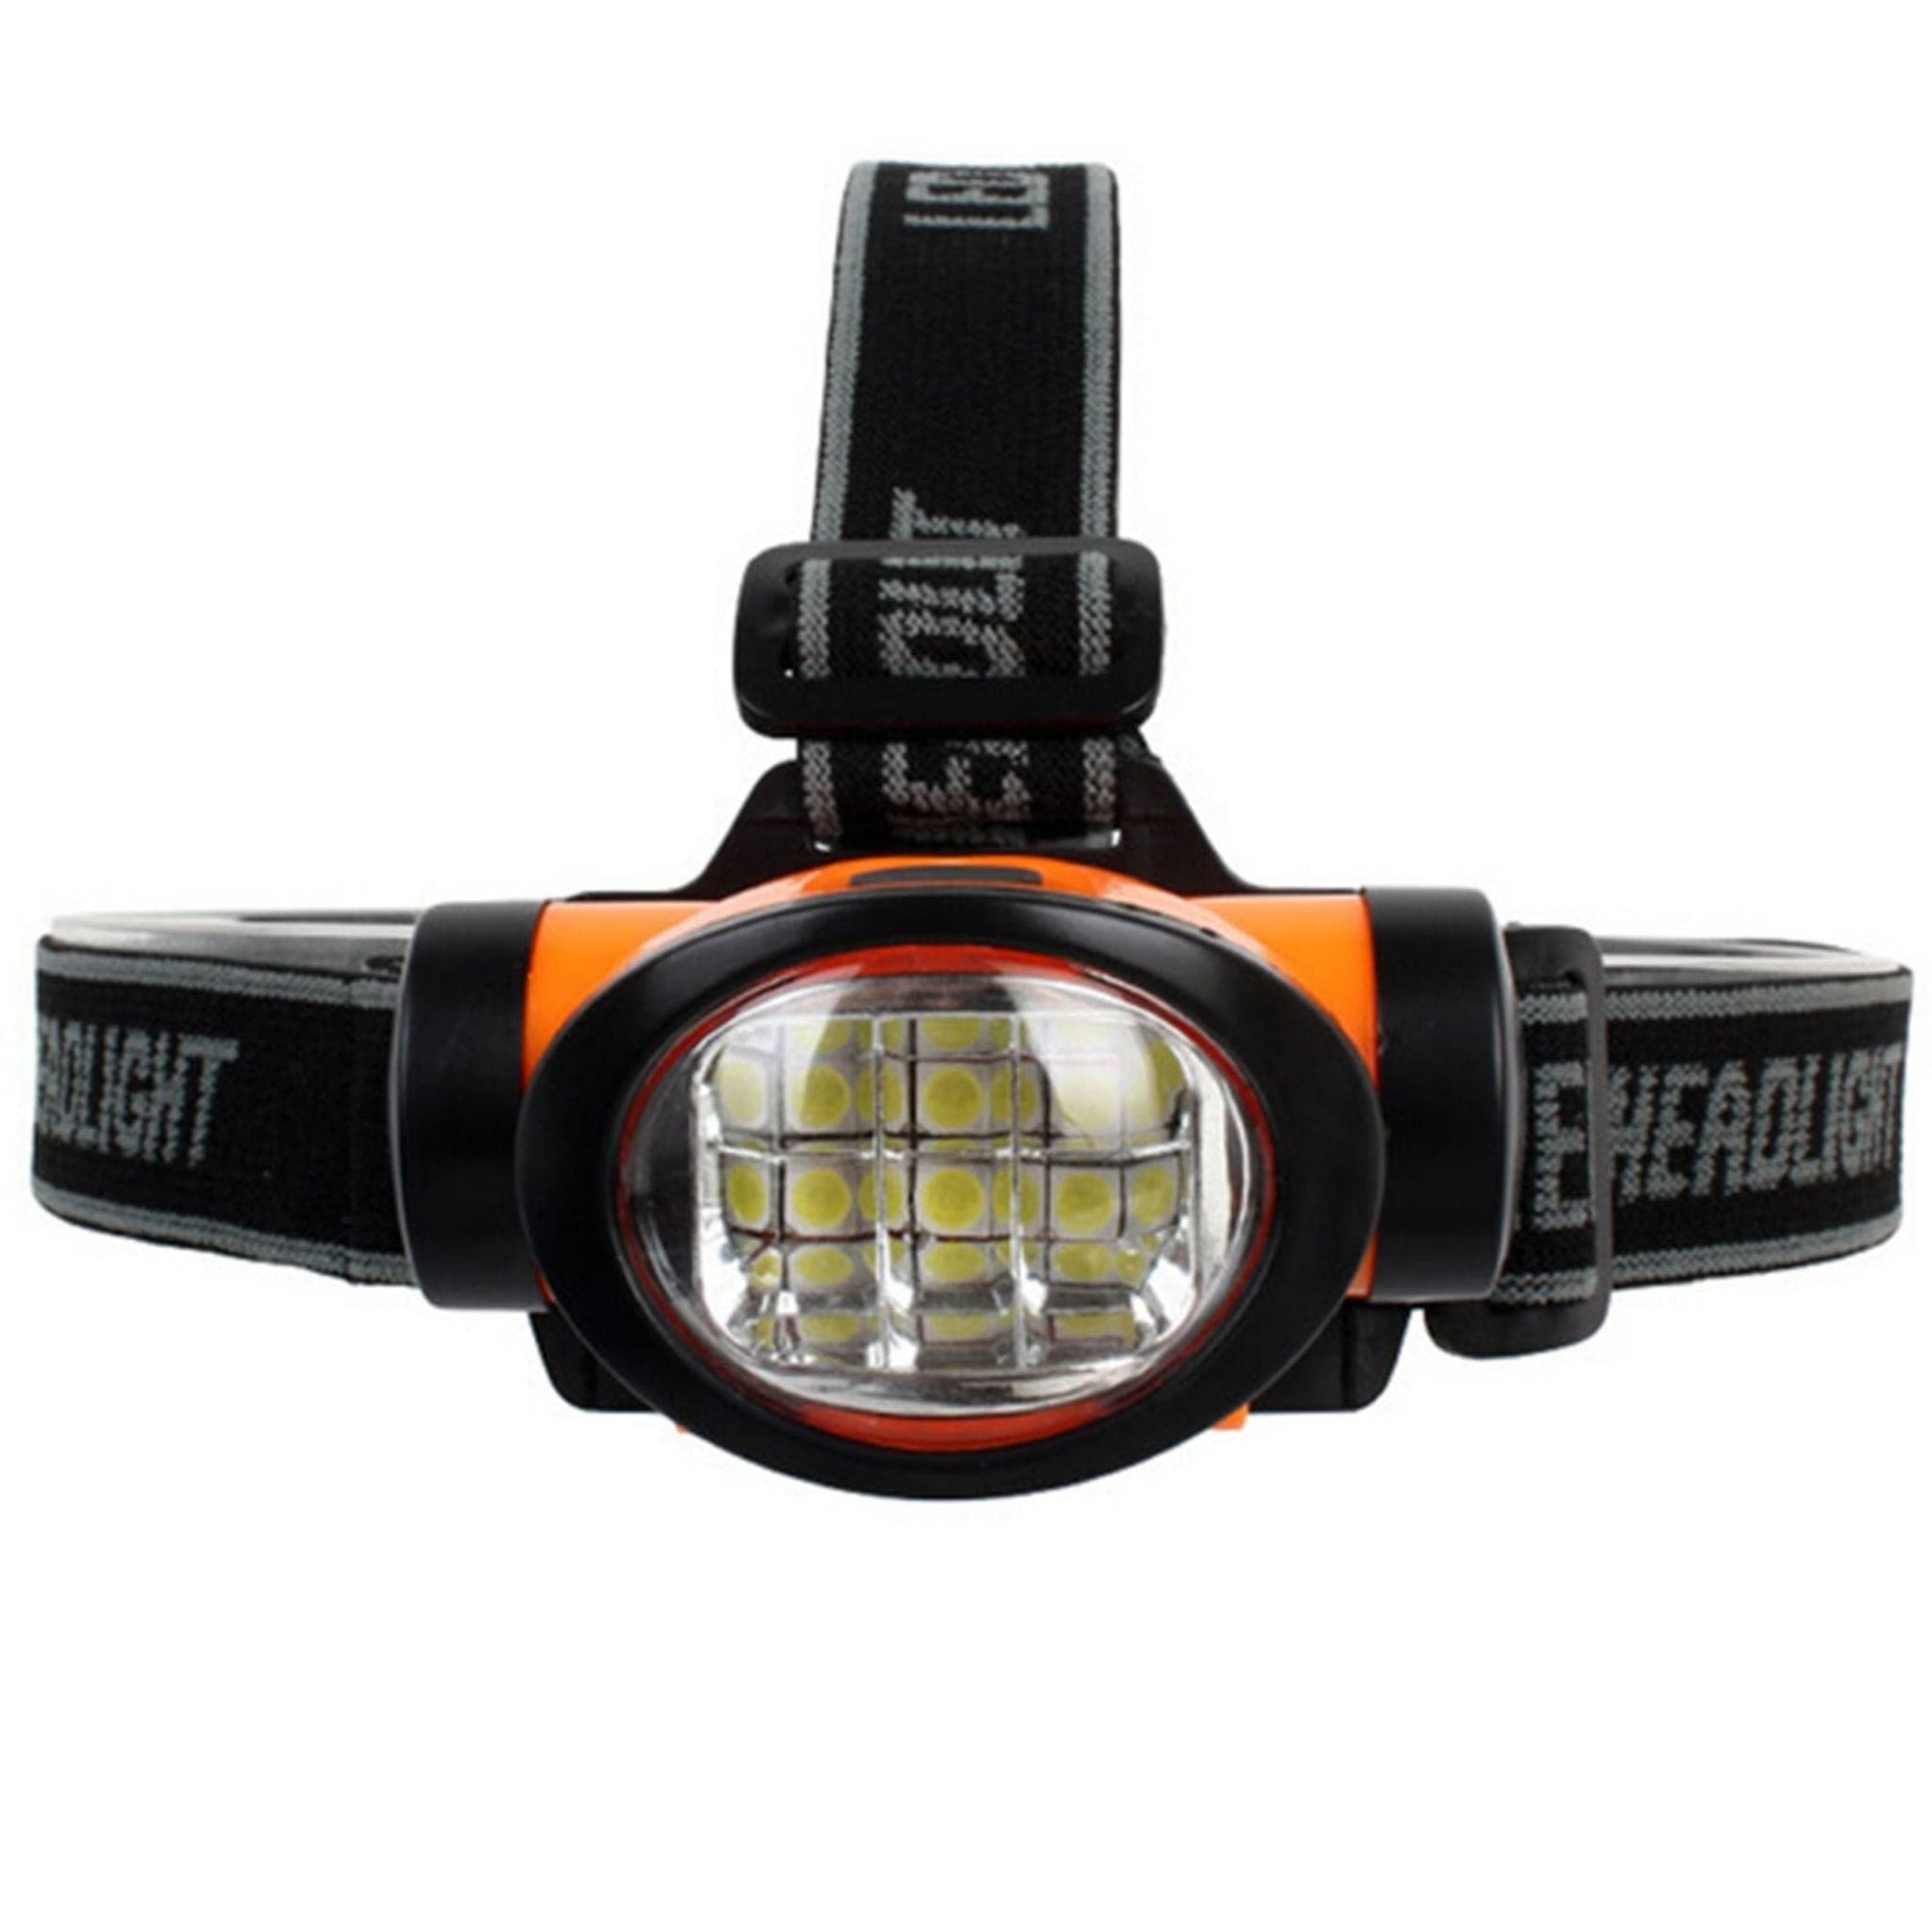 LED Head torch Headlamp - South East Clearance Centre